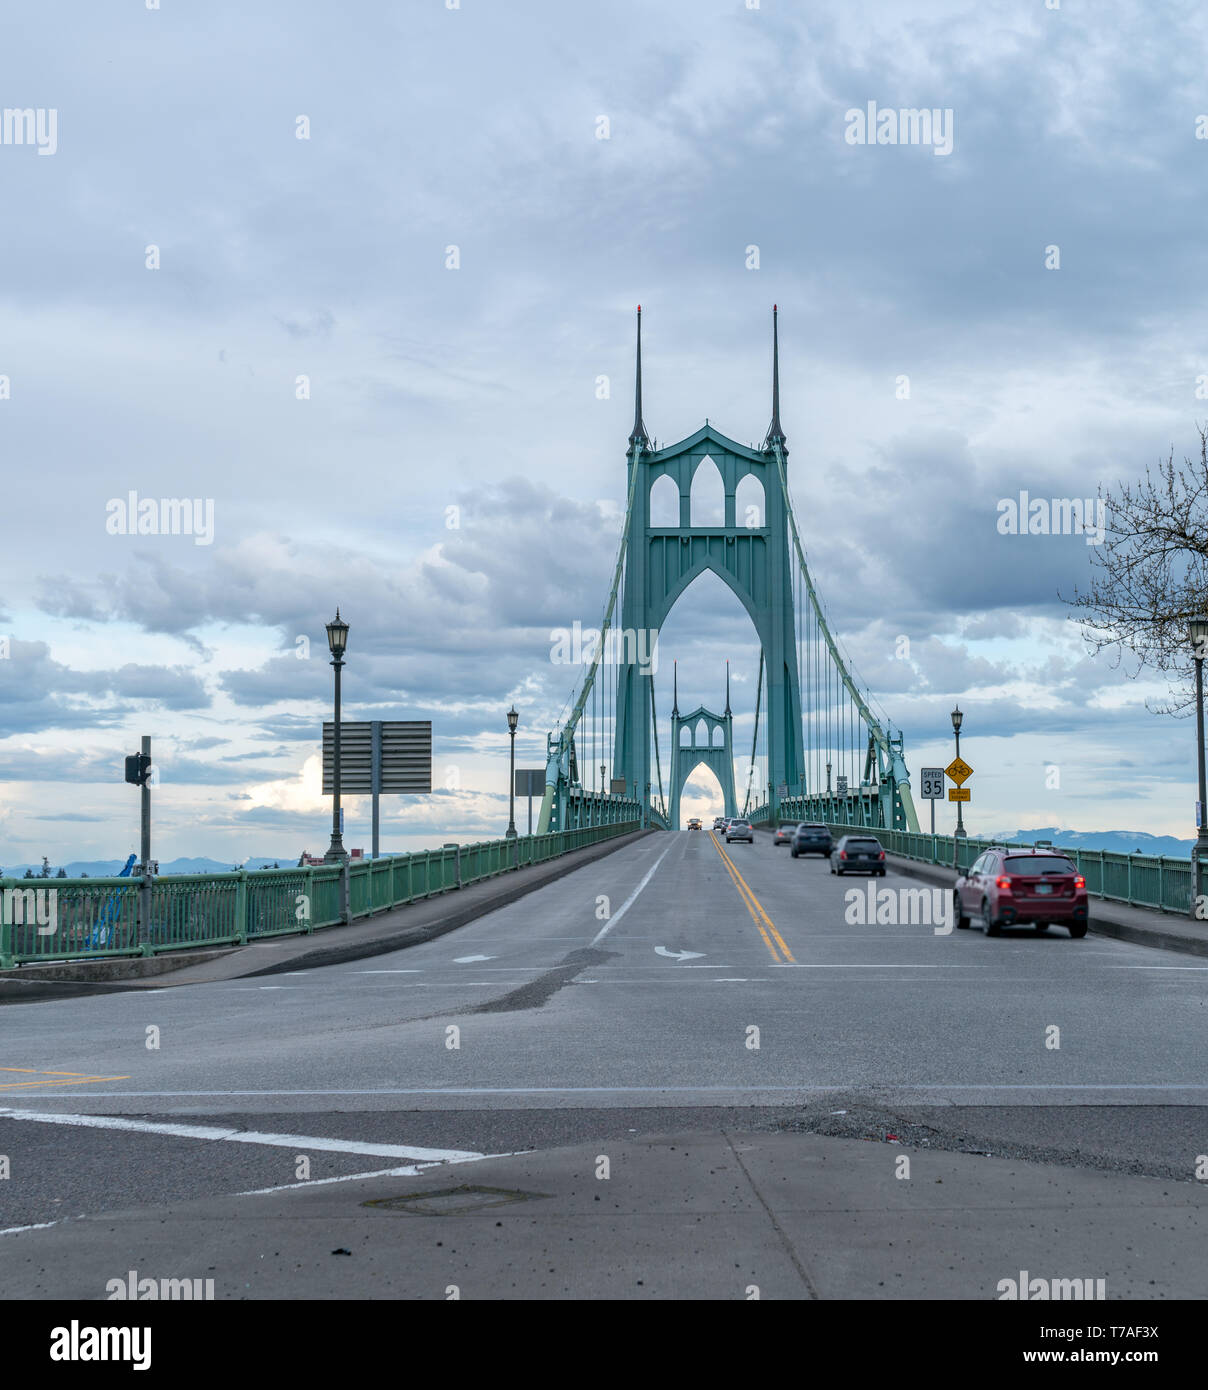 Looking At the Traffic Lanes of St Johns Bridge with Cloudy skies Stock Photo